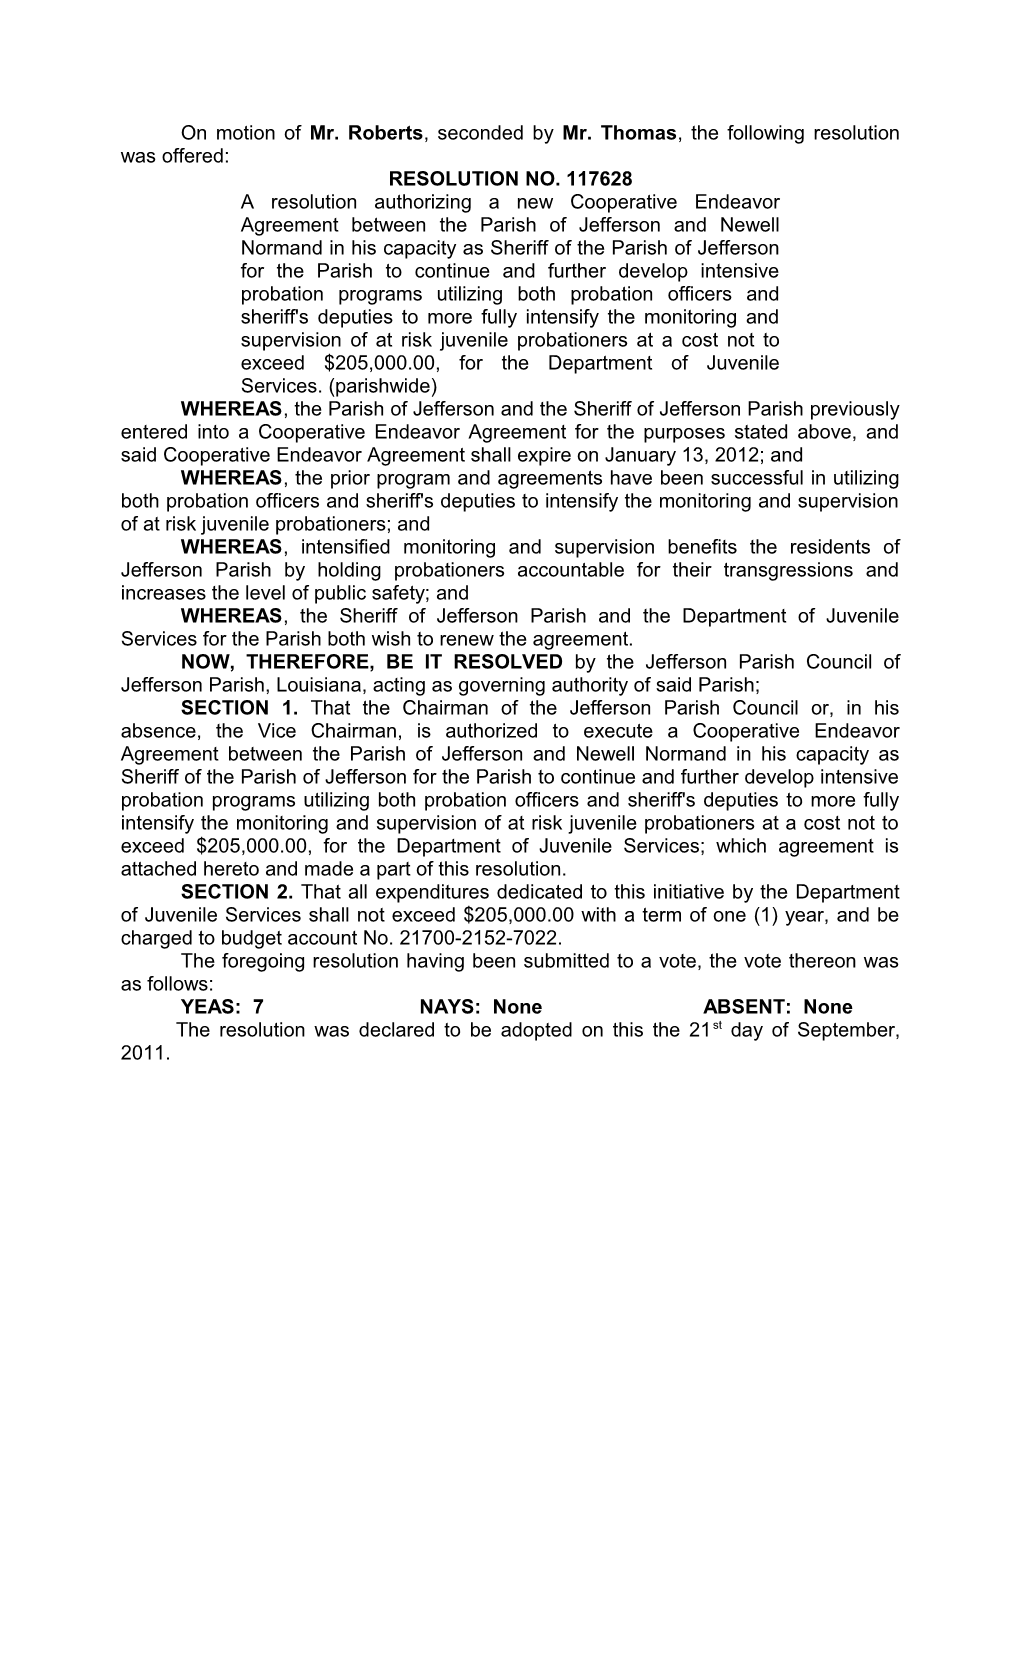 On Motion of Mr. Roberts, Seconded by Mr. Thomas , the Following Resolution Was Offered